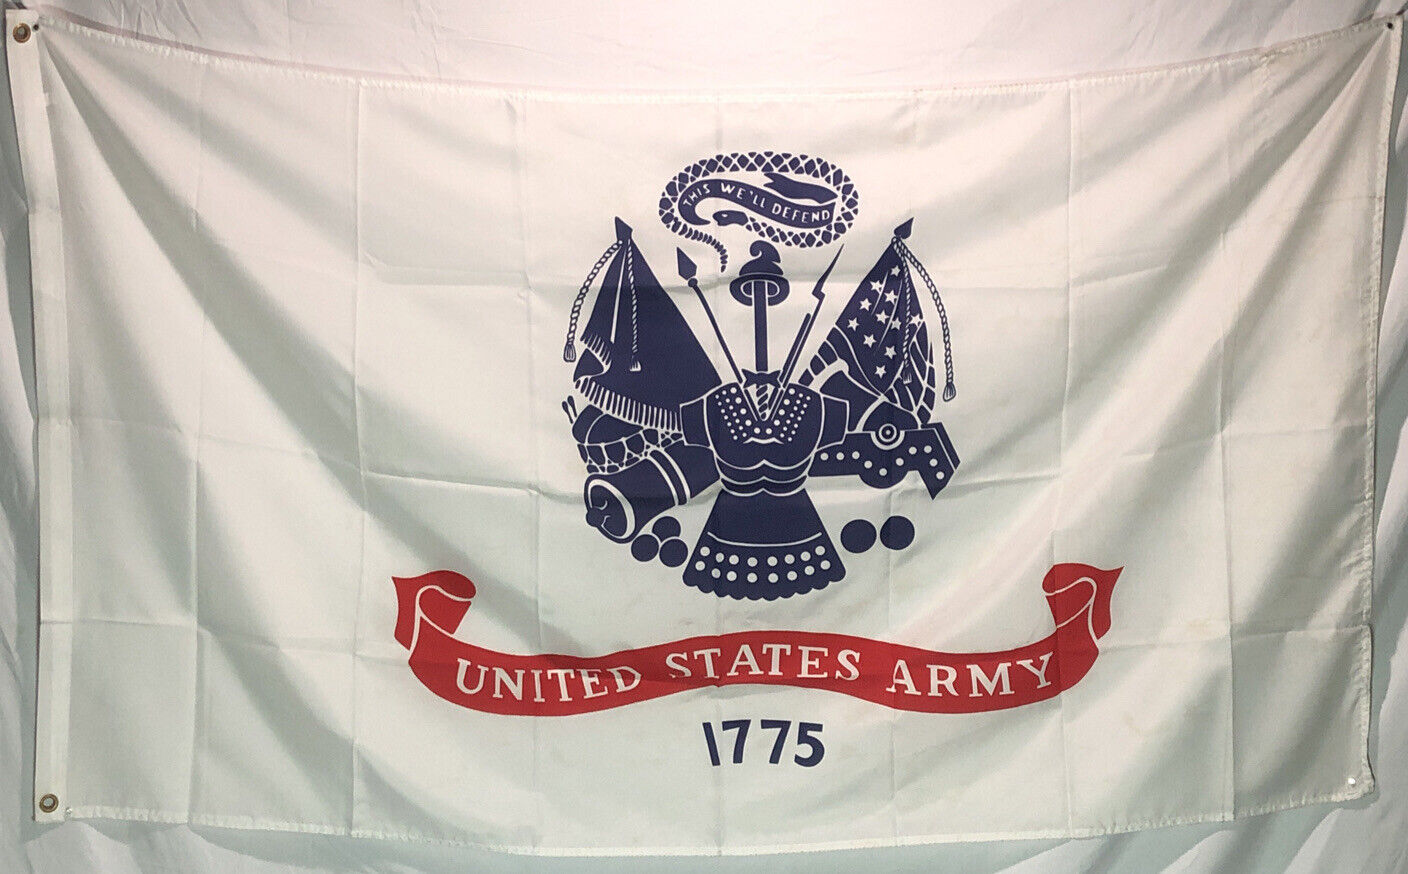 36” X 60” Vintage U.S. Army White 1775 Flag Banner “This We’ll Defend”